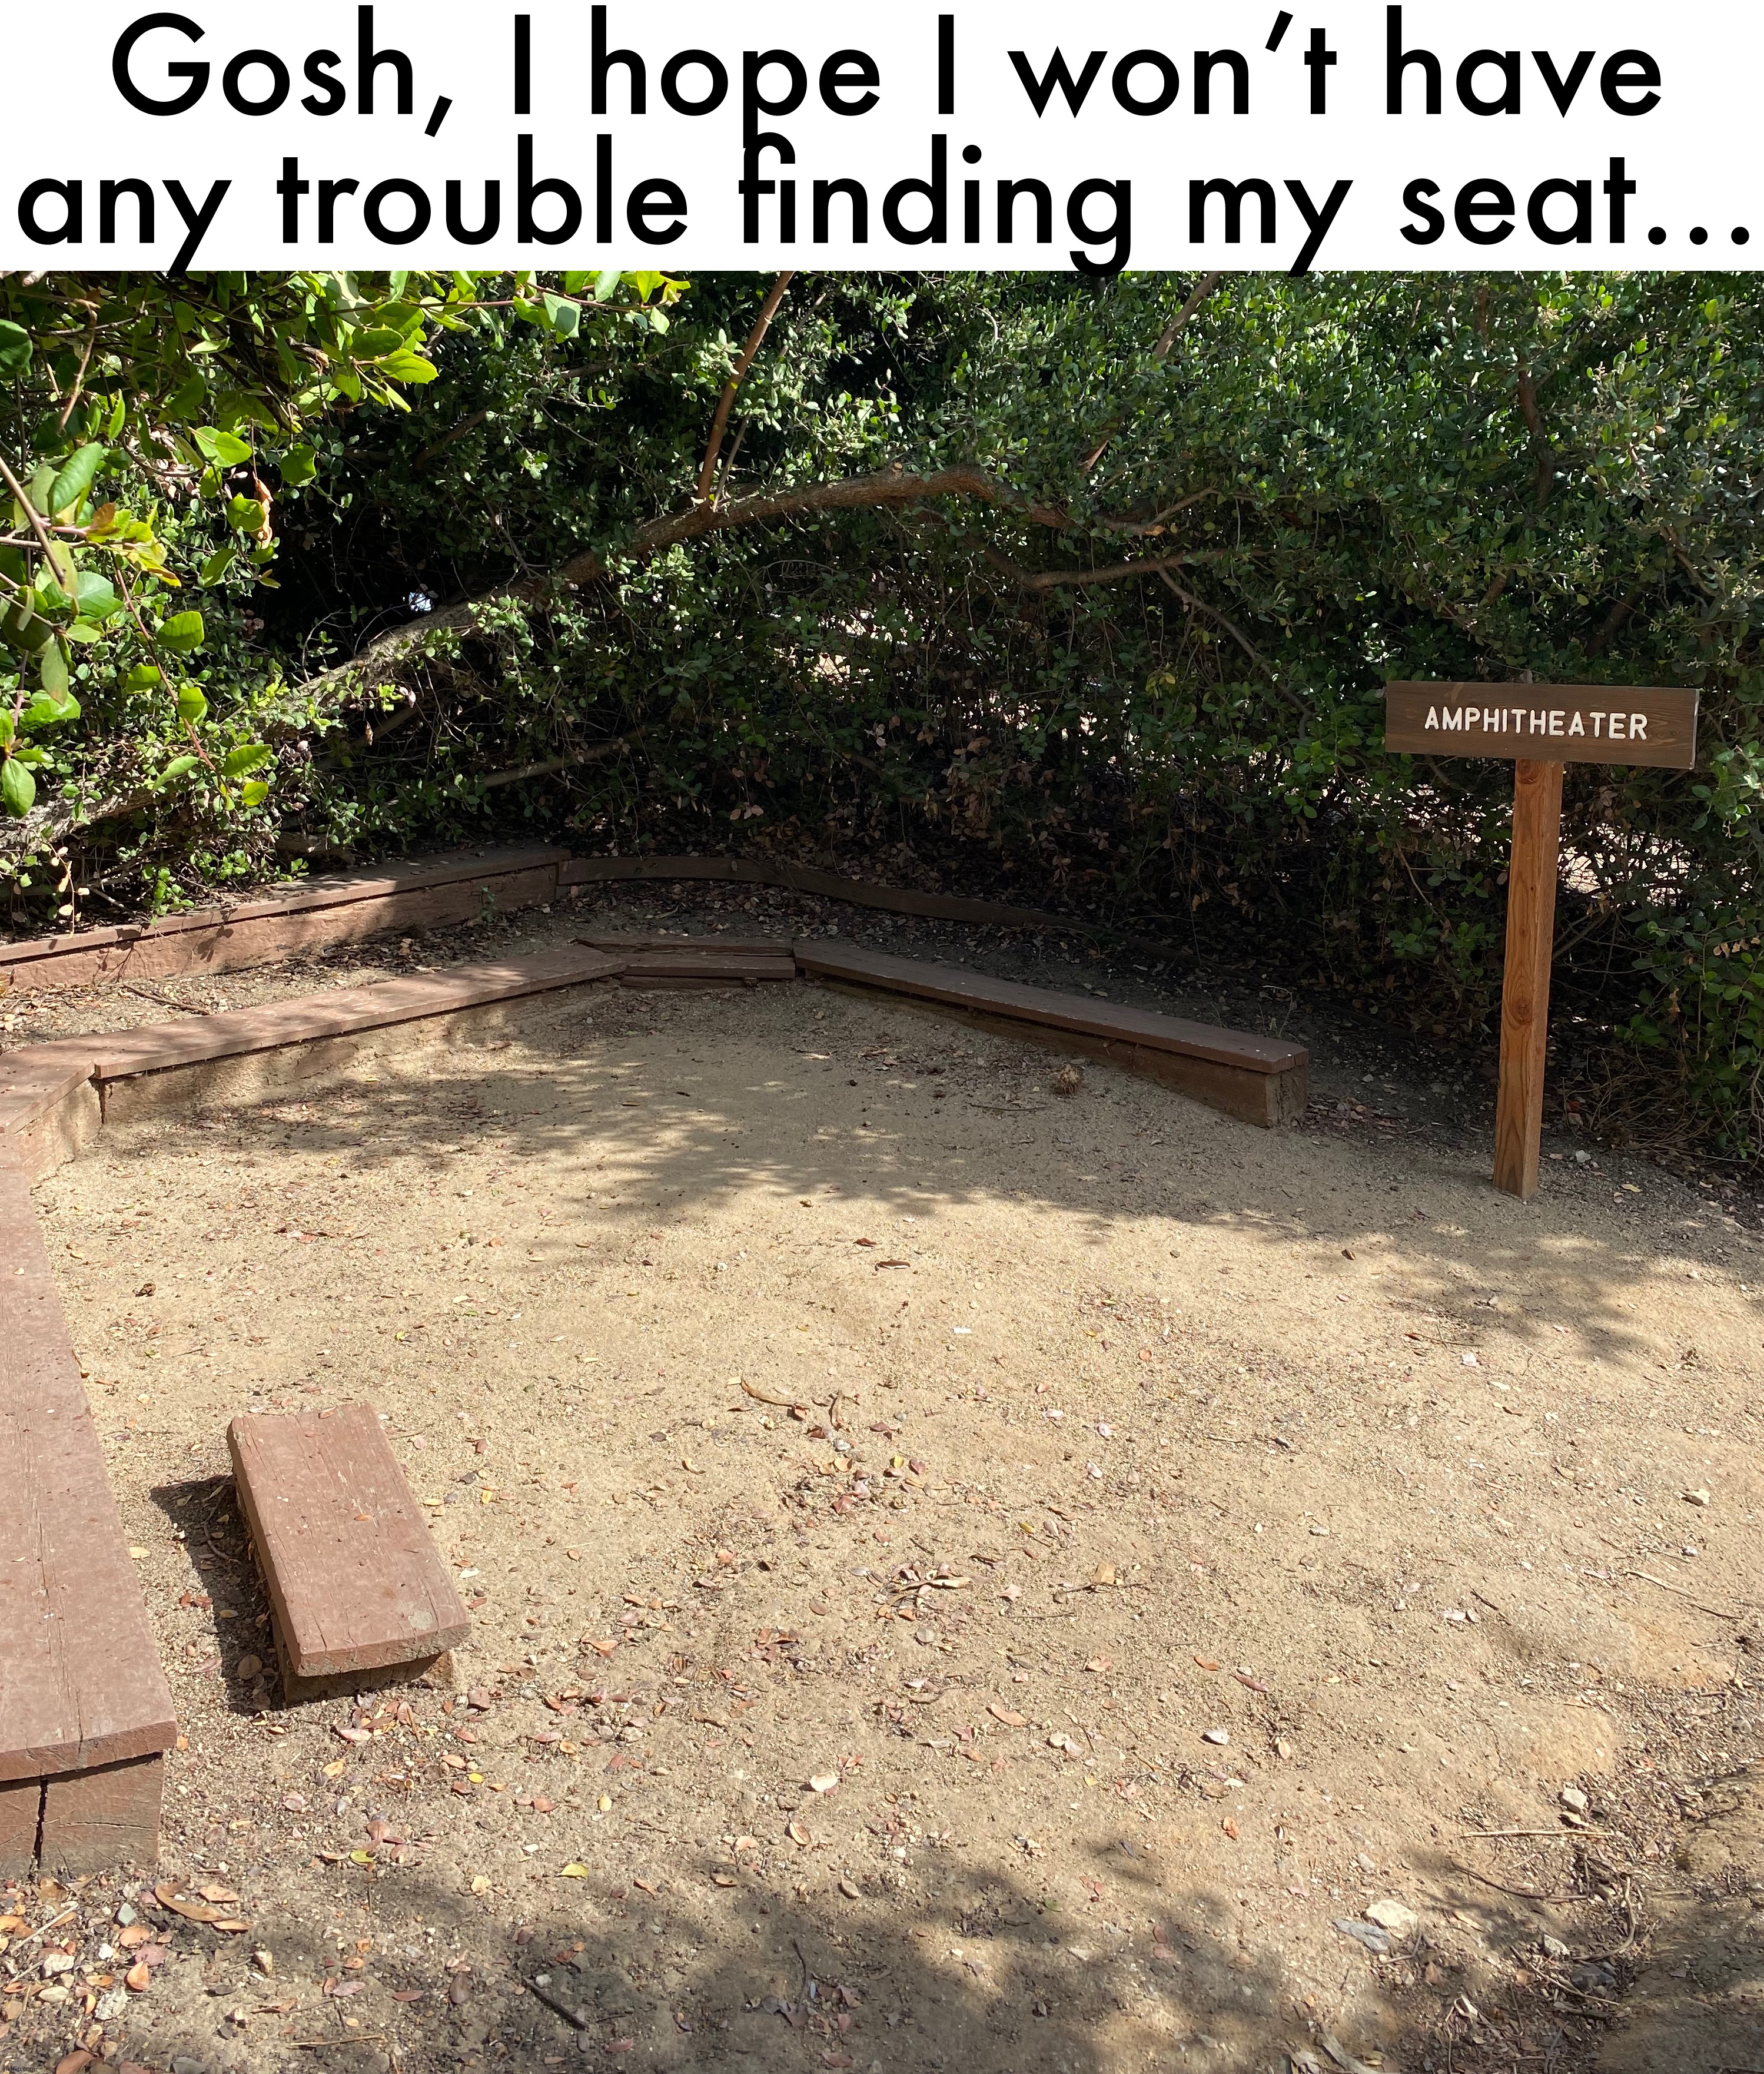 this should not be called an amphitheater lol | Gosh, I hope I won’t have any trouble finding my seat… | image tagged in funny,meme,amphitheater,hope i can find my seat | made w/ Imgflip meme maker